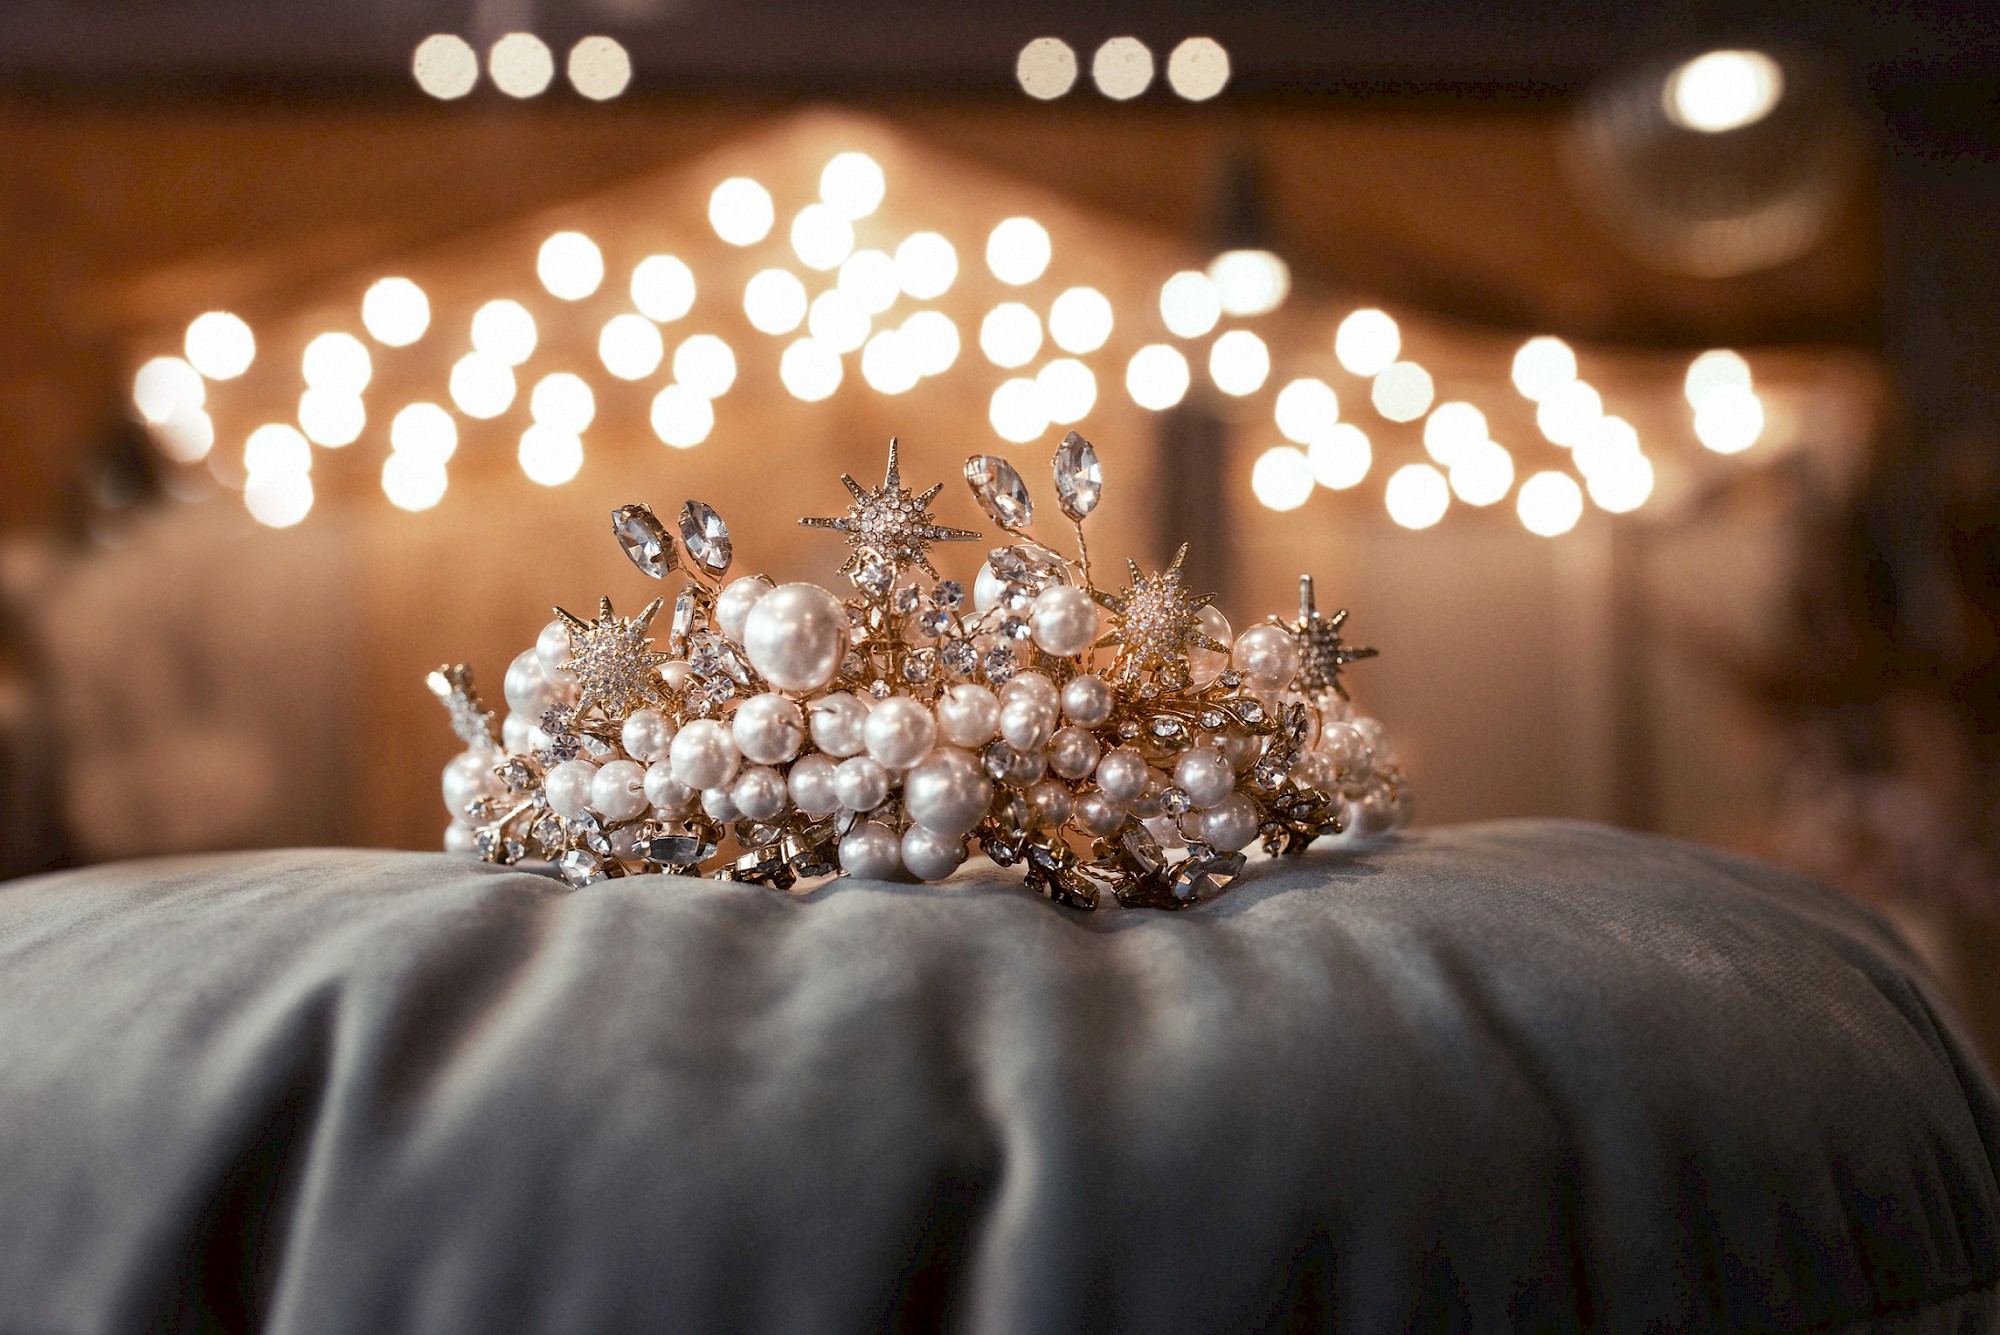 Tiara with pearls